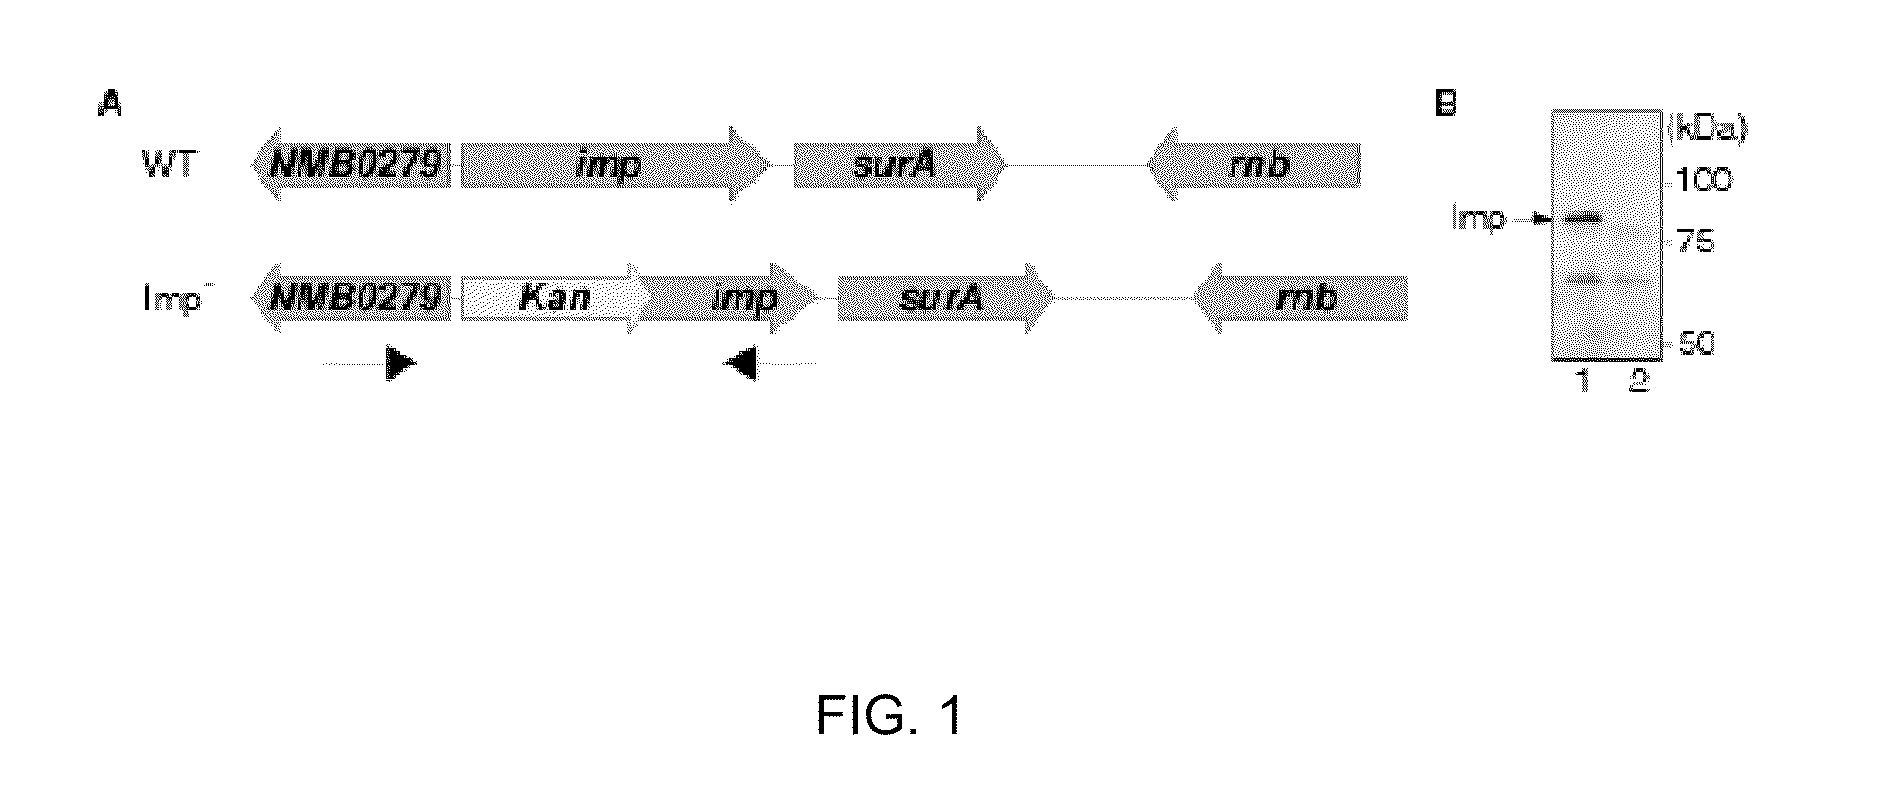 Outer membrane vesicles and uses thereof